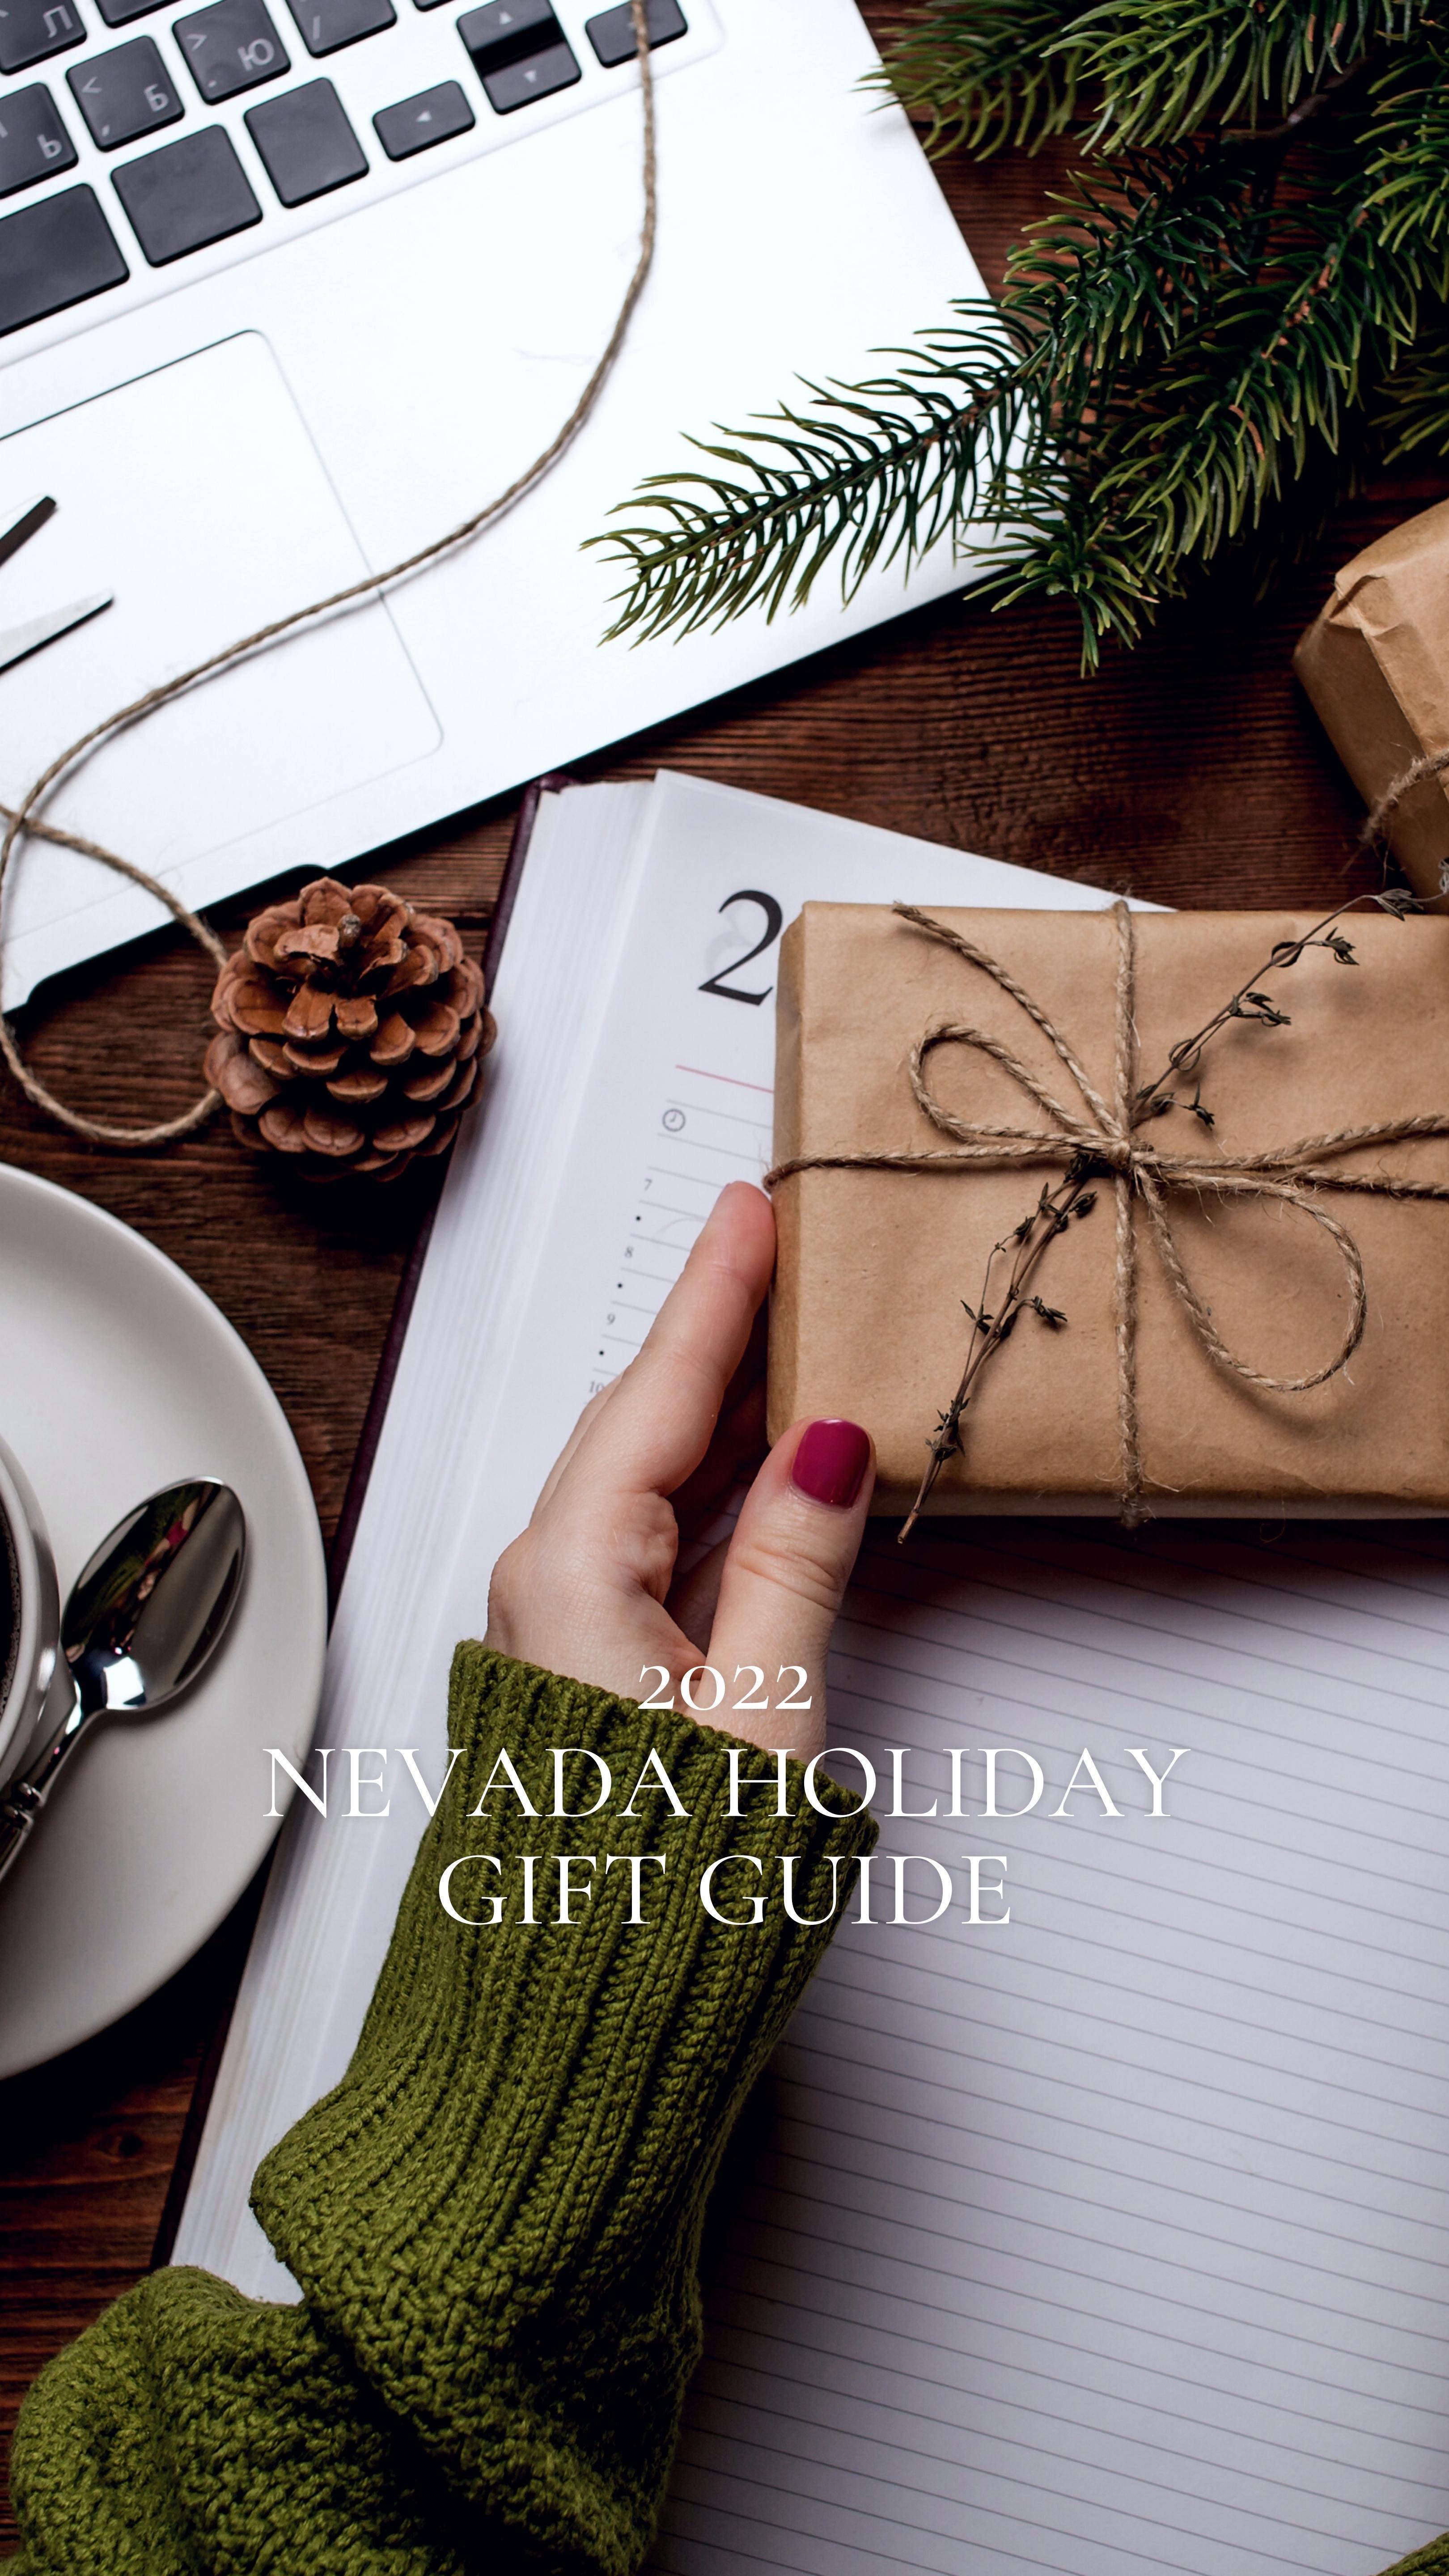 NEVADA HOLIDAY GIFT GUIDE 2022 🎁 Glitzy or gourmet. Self-care or seriously stylish. This Nevada holiday gift guide offers up some of the coolest goods and experiences for fulfilling your seasonal shopping list. Read the full article using the link in our bio!